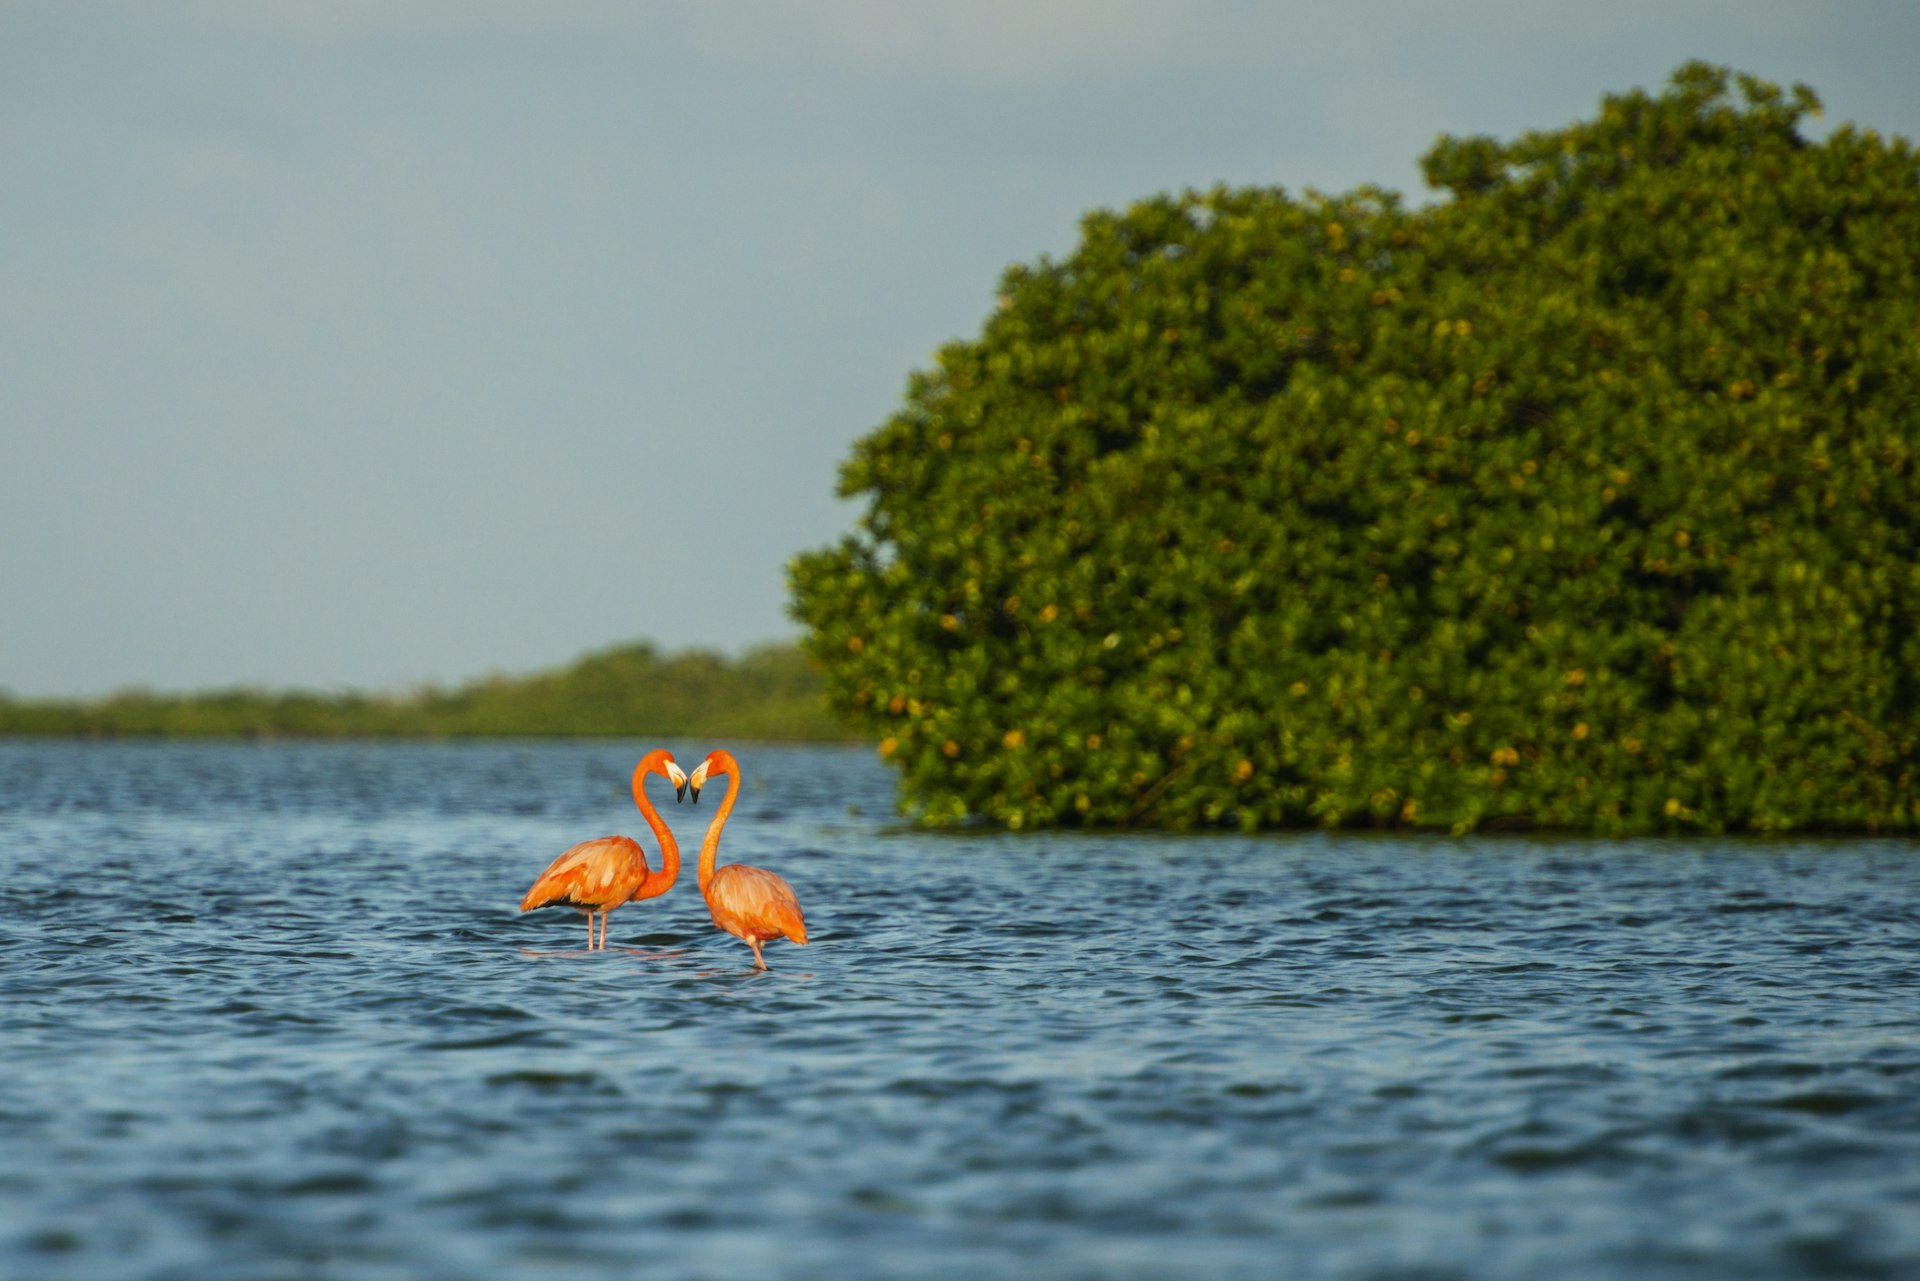 Two flamingos with a pinkish-orange hue stand in a body of water with a small island behind them